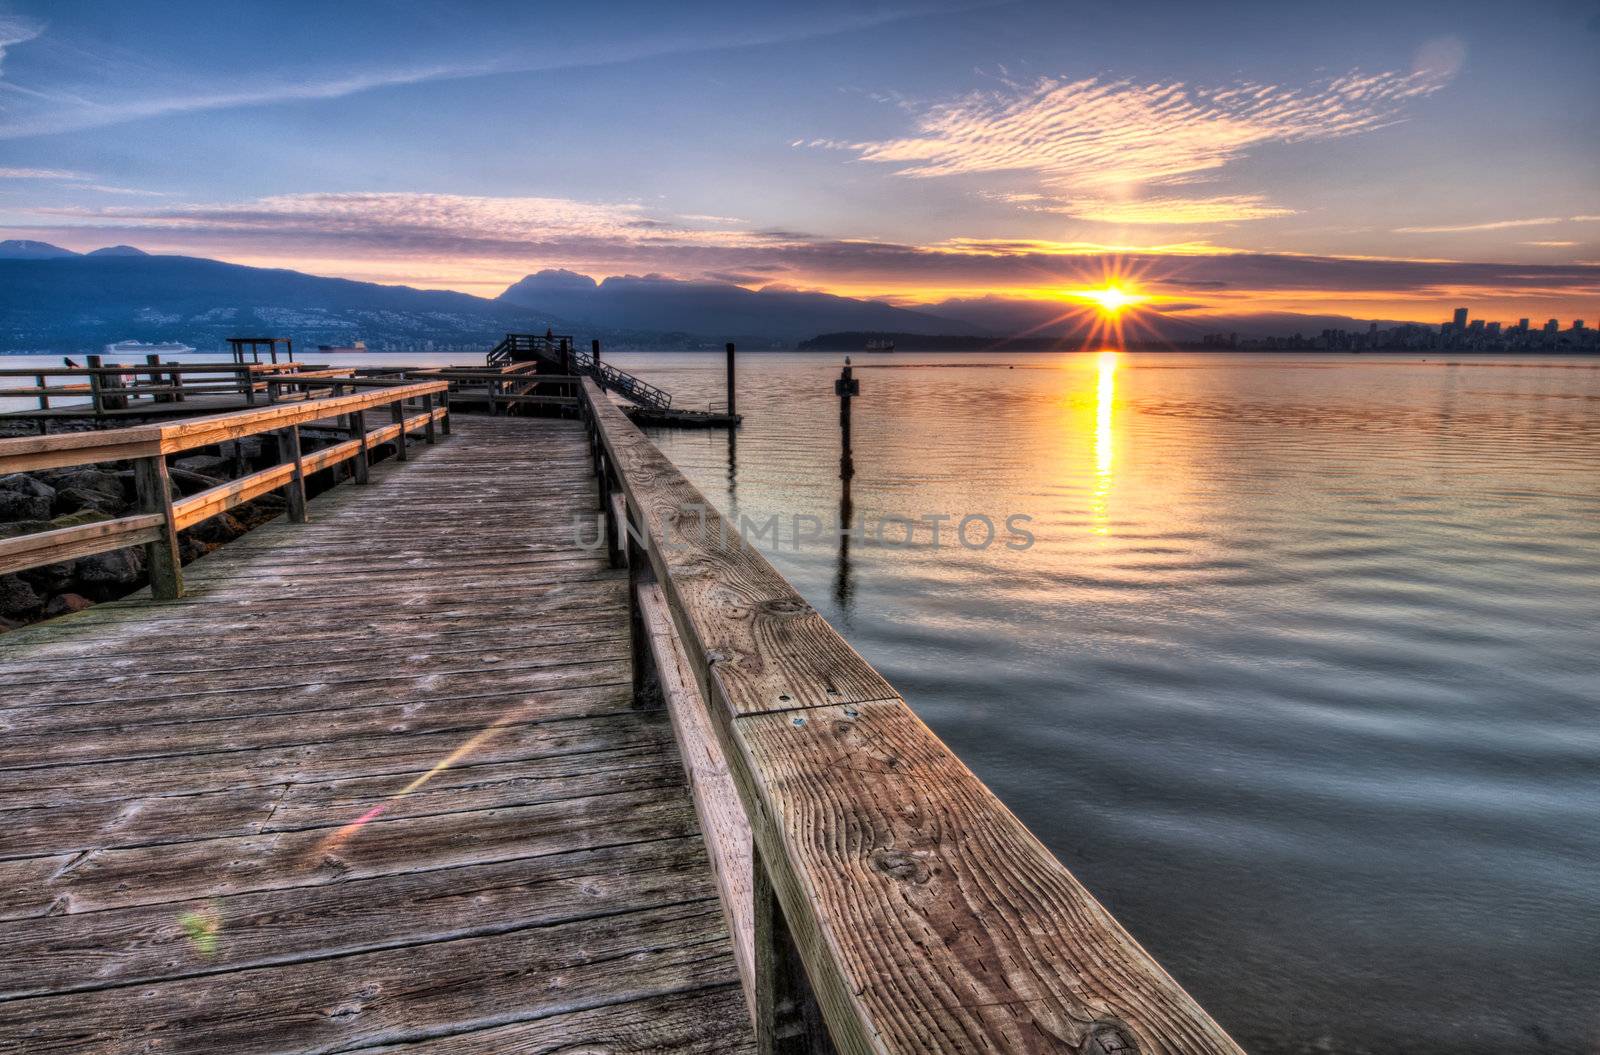 Pier moving out to the water while sun star rises over the mountain and Vancouver skyline can be seen to the right of the photo.